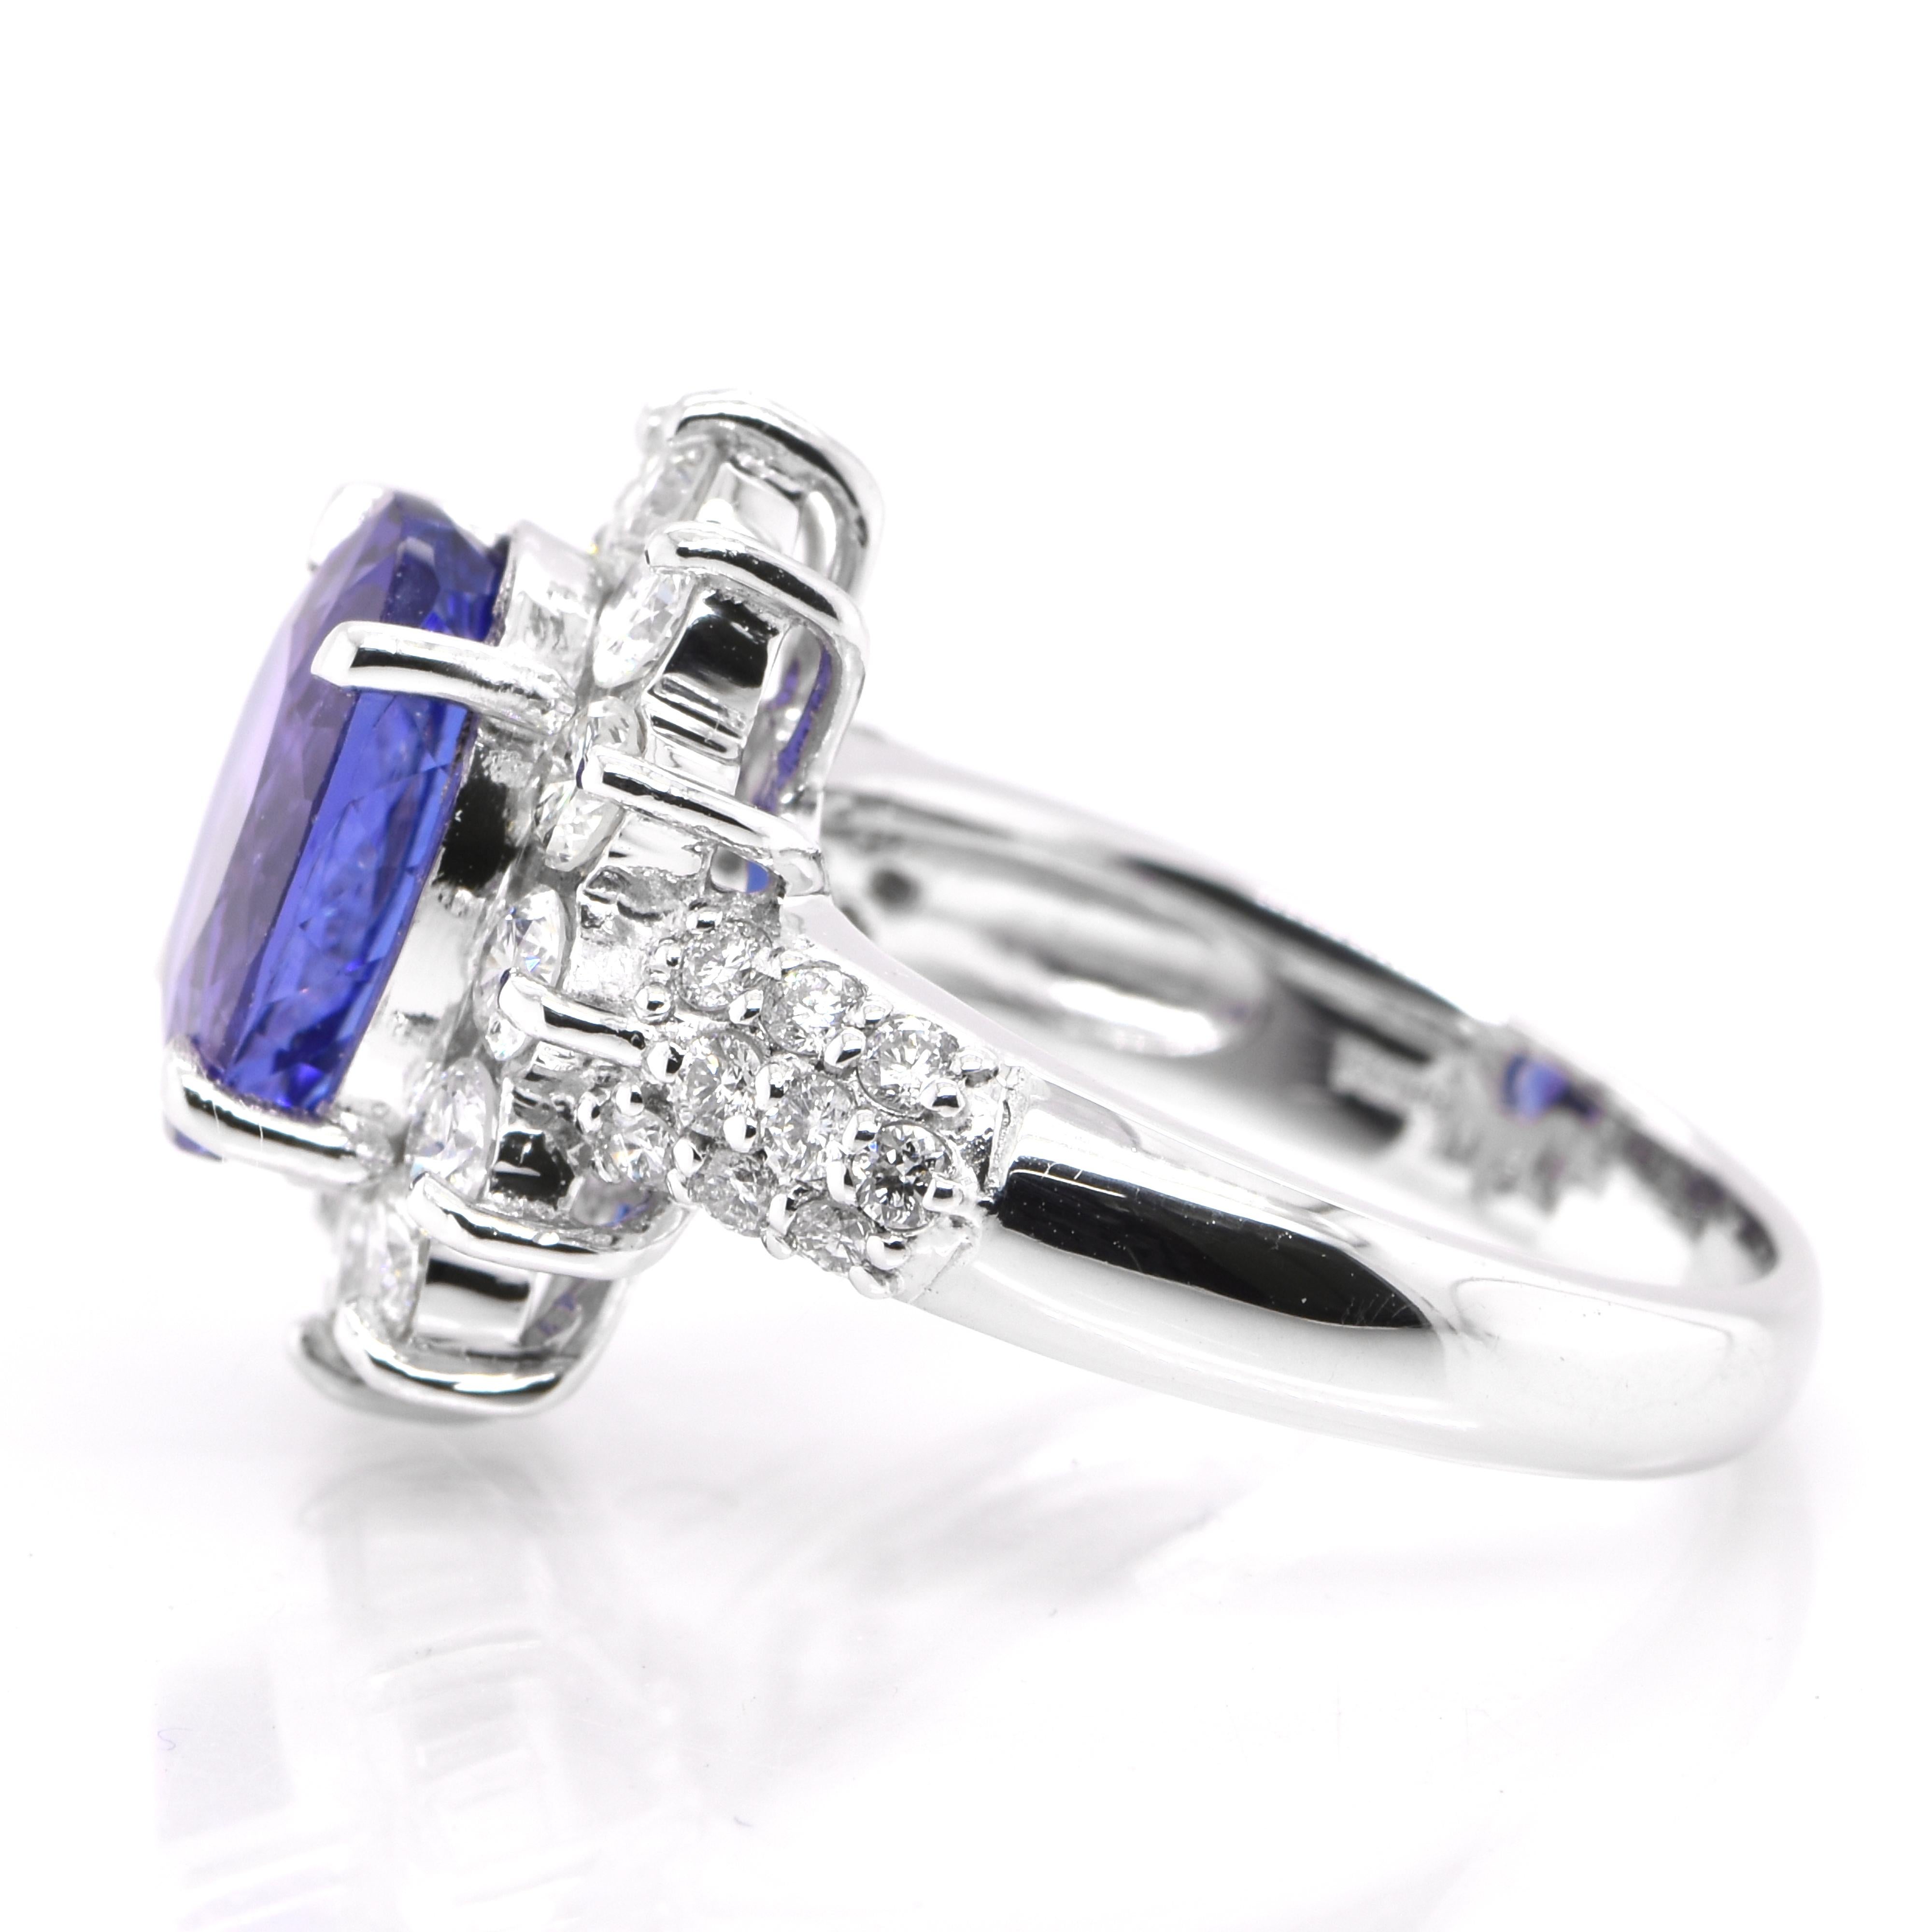 Oval Cut 4.14 Carat Natural Oval-Cut Tanzanite and Diamond Cocktail Ring Set in Platinum For Sale